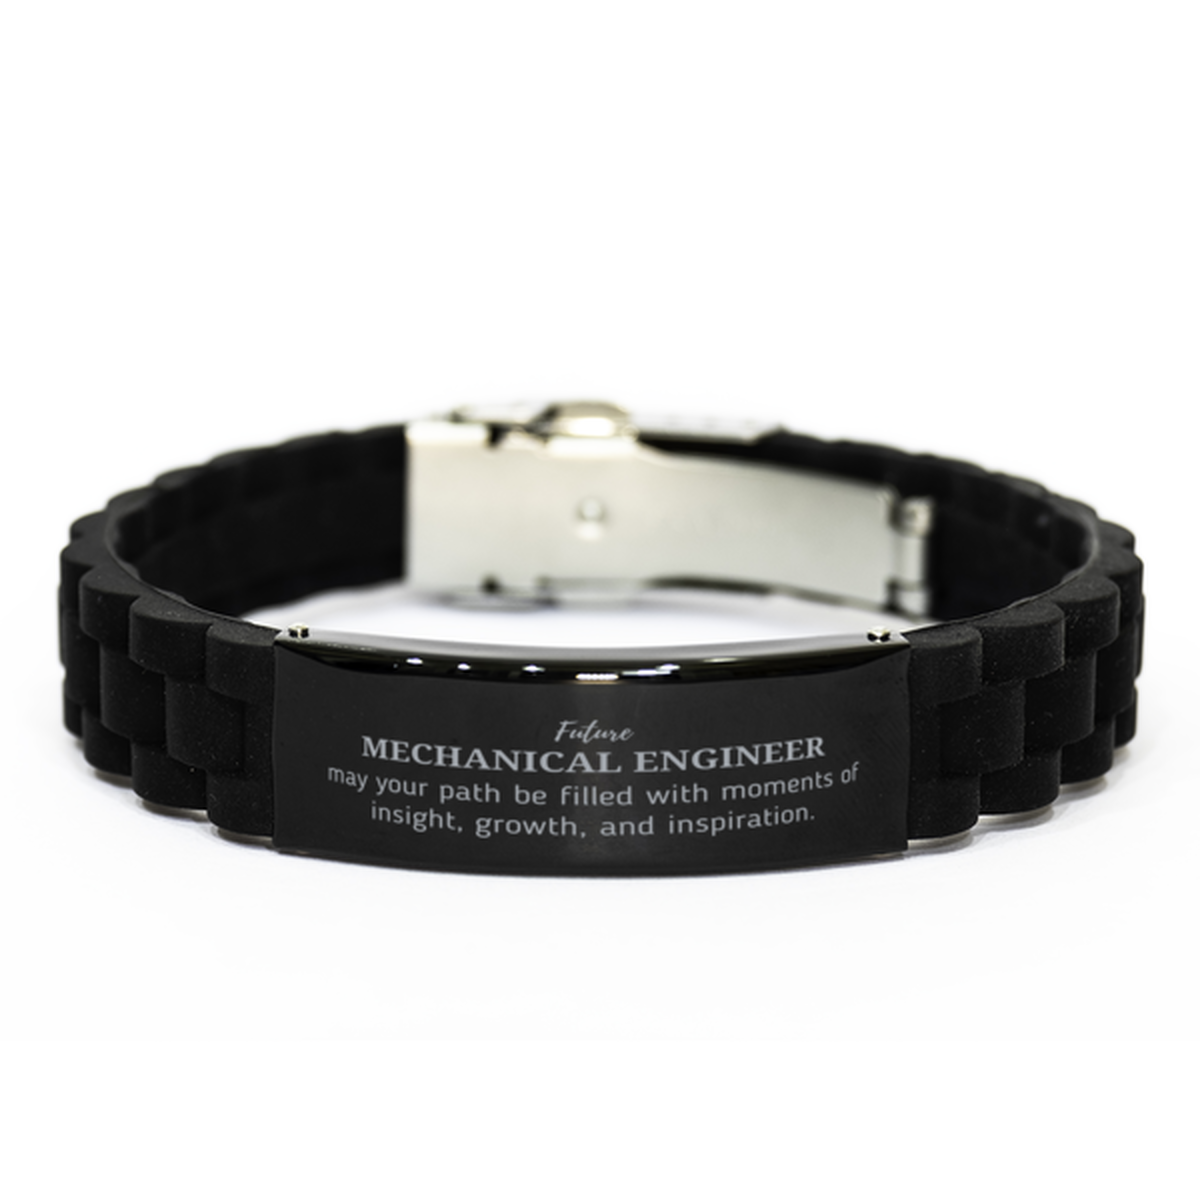 Future Mechanical Engineer Gifts, May your path be filled with moments of insight, Graduation Gifts for New Mechanical Engineer, Christmas Unique Black Glidelock Clasp Bracelet For Men, Women, Friends